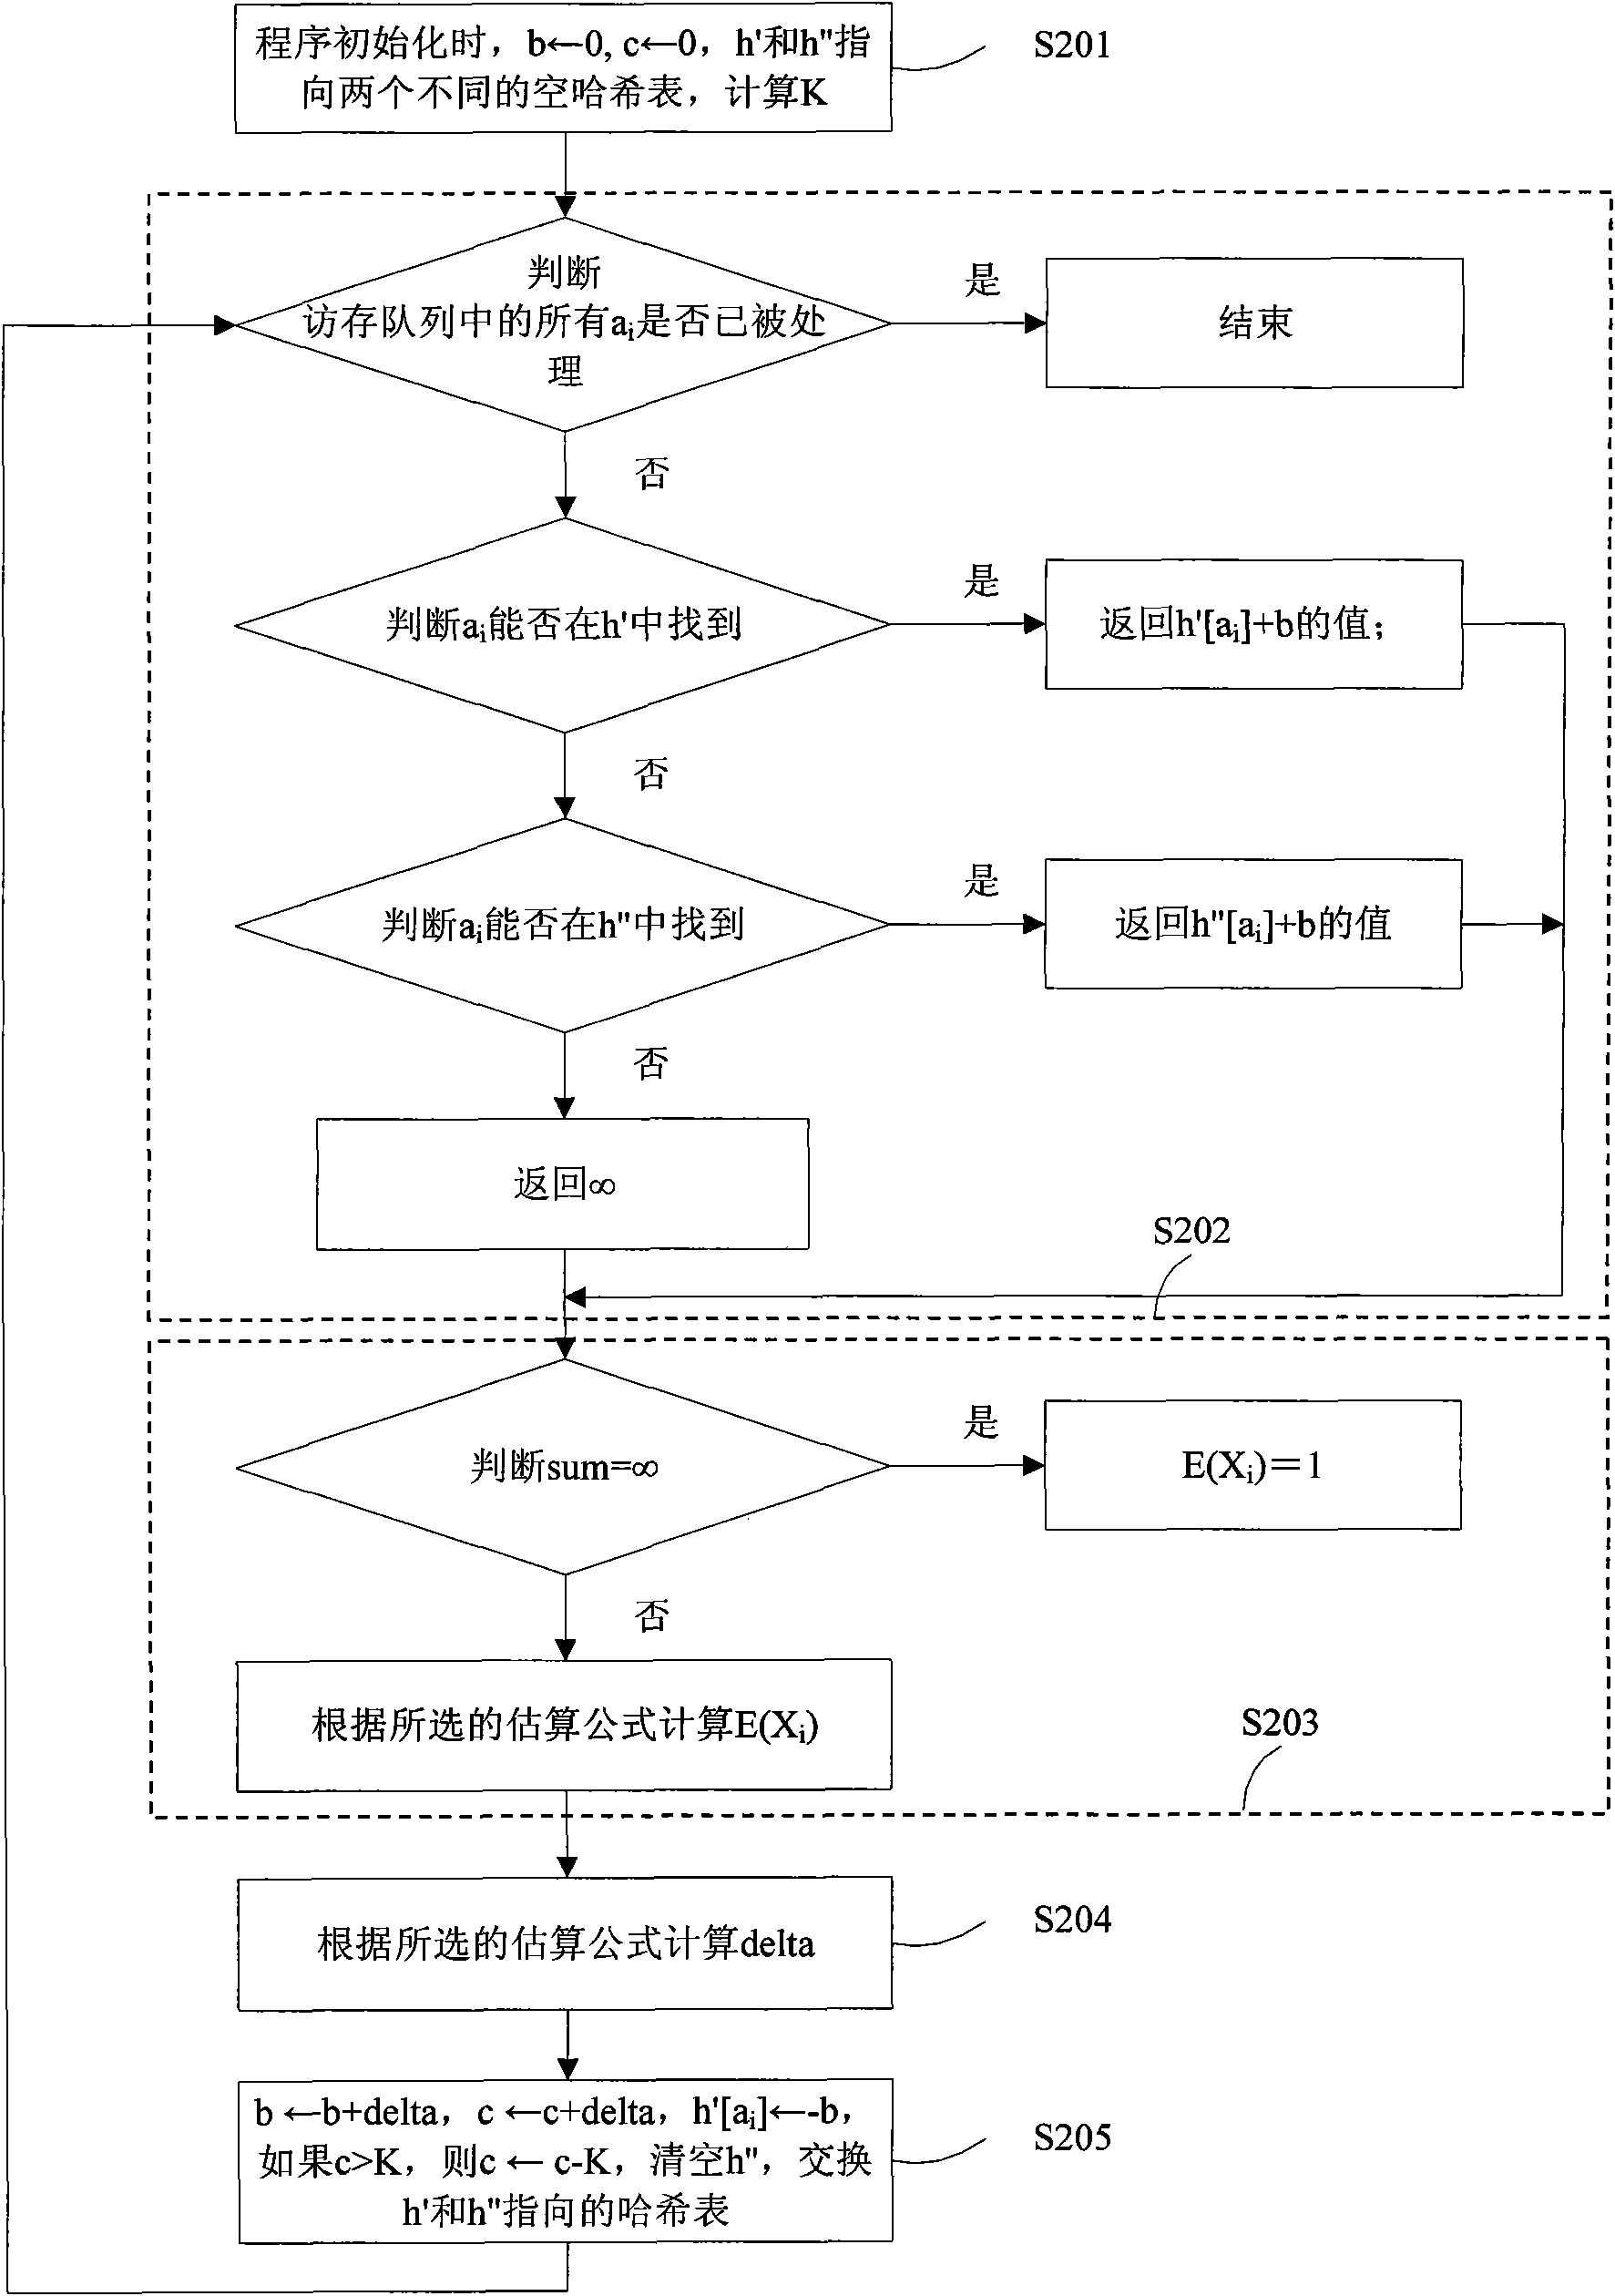 Efficient analogy method for replacing cache randomly